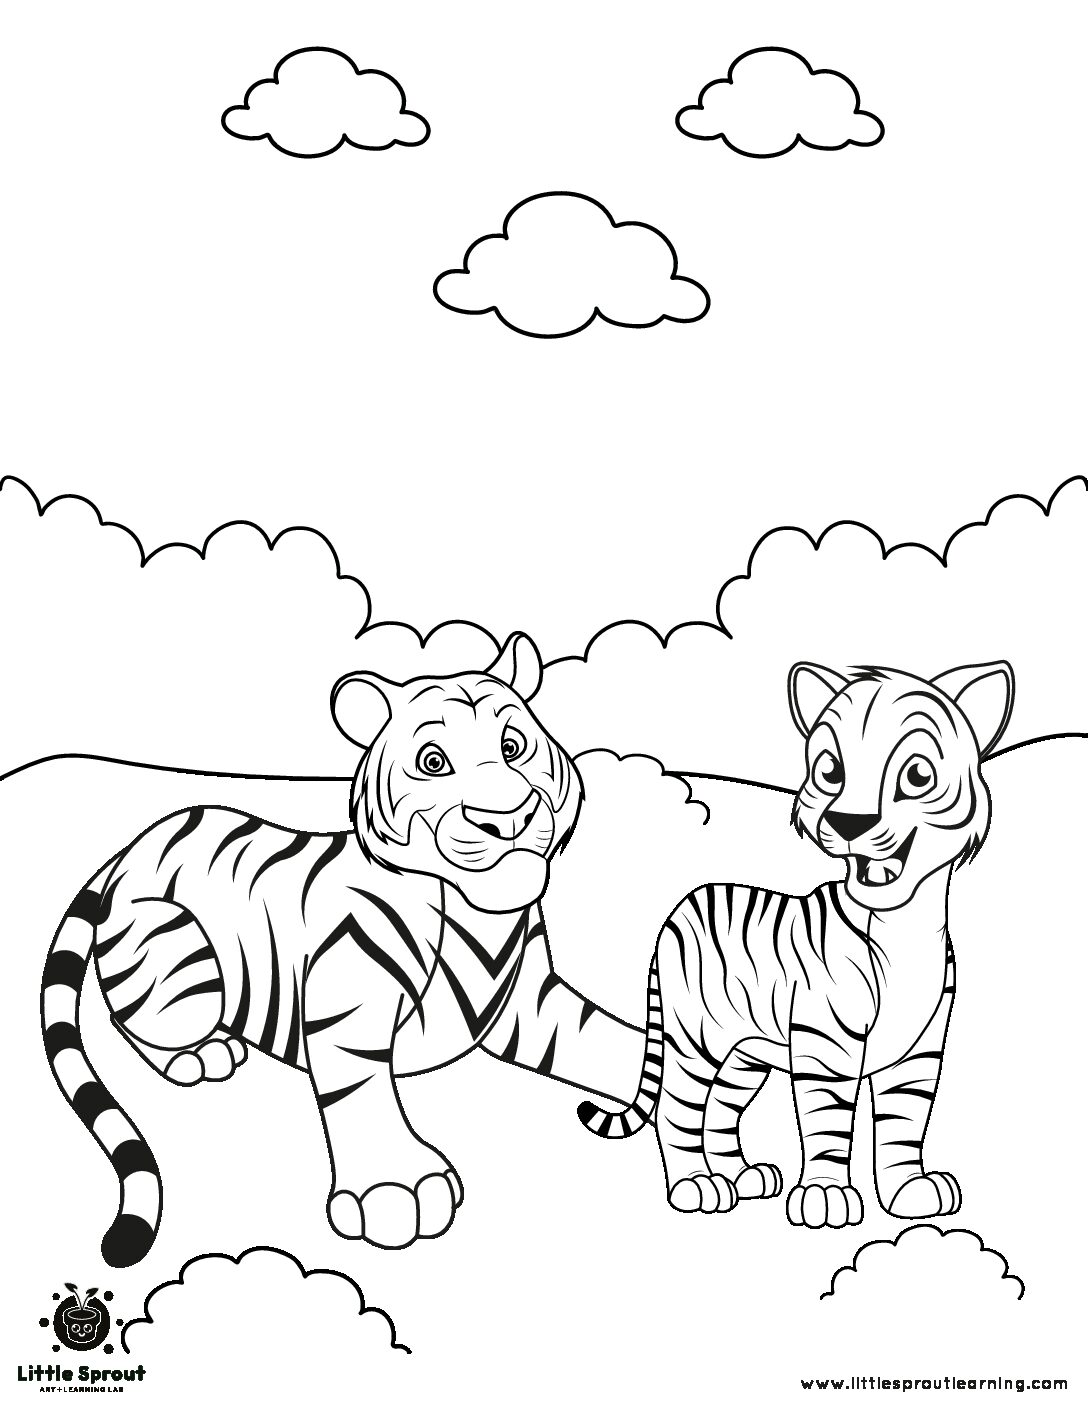 Coloring Page Tiger 8 Little Sprout Learning 1 pdf